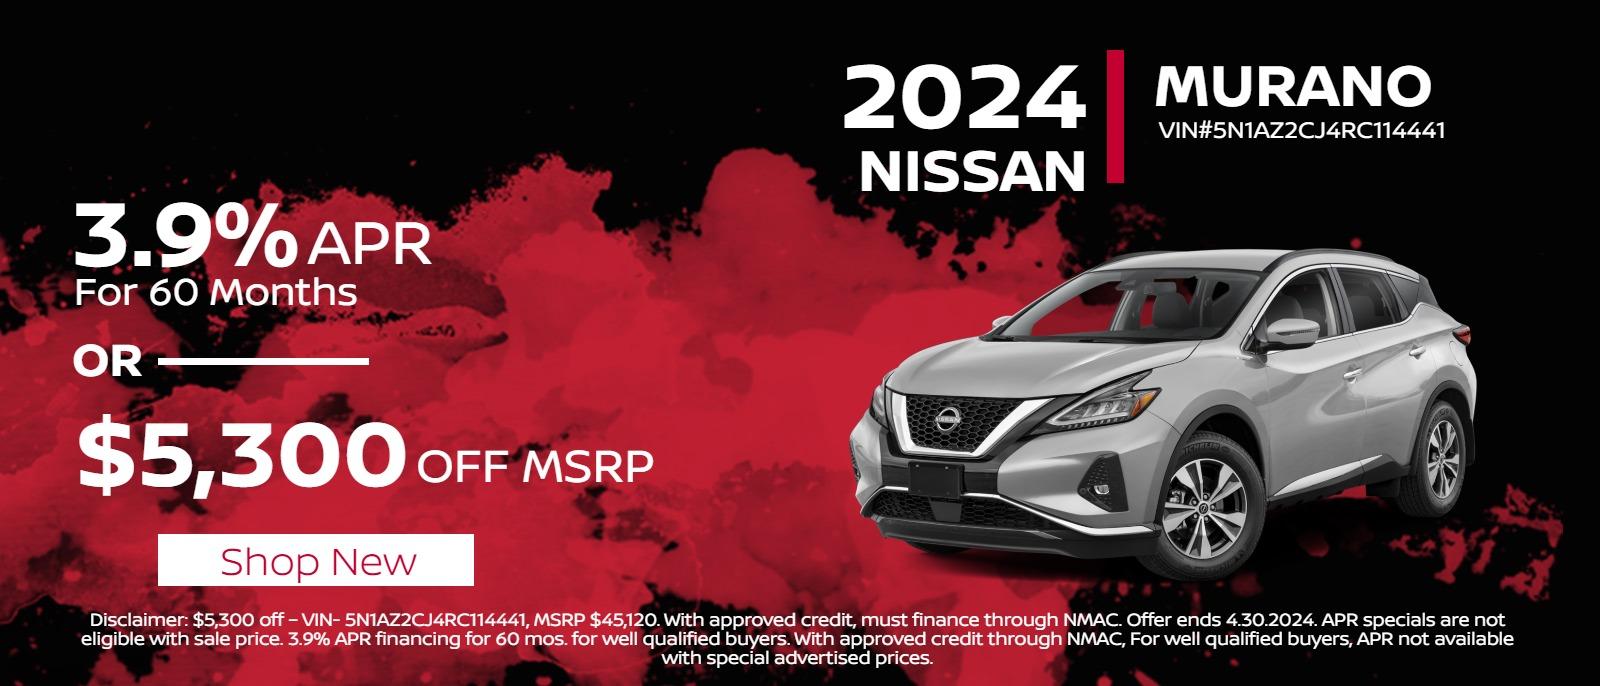 2024 Murano
 3.9% APR for 60 months 
or 
$5,300 off MSRP